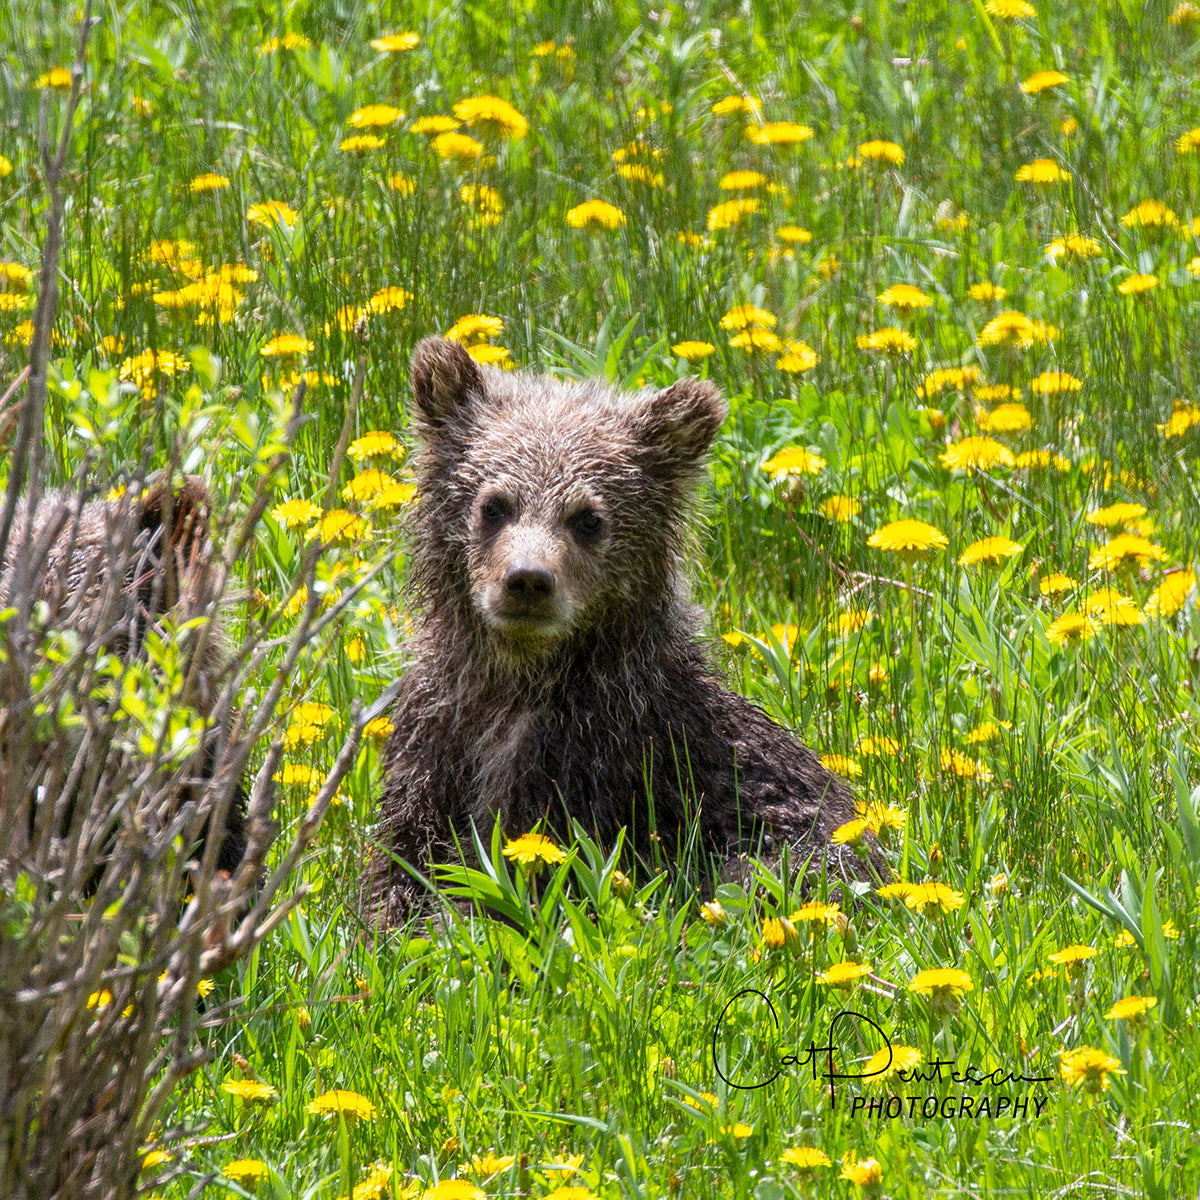 Wildlife Wild Grizzly bear cub in field of dandelions. Offered on Metal or canvas. Cat Pentescu Photography